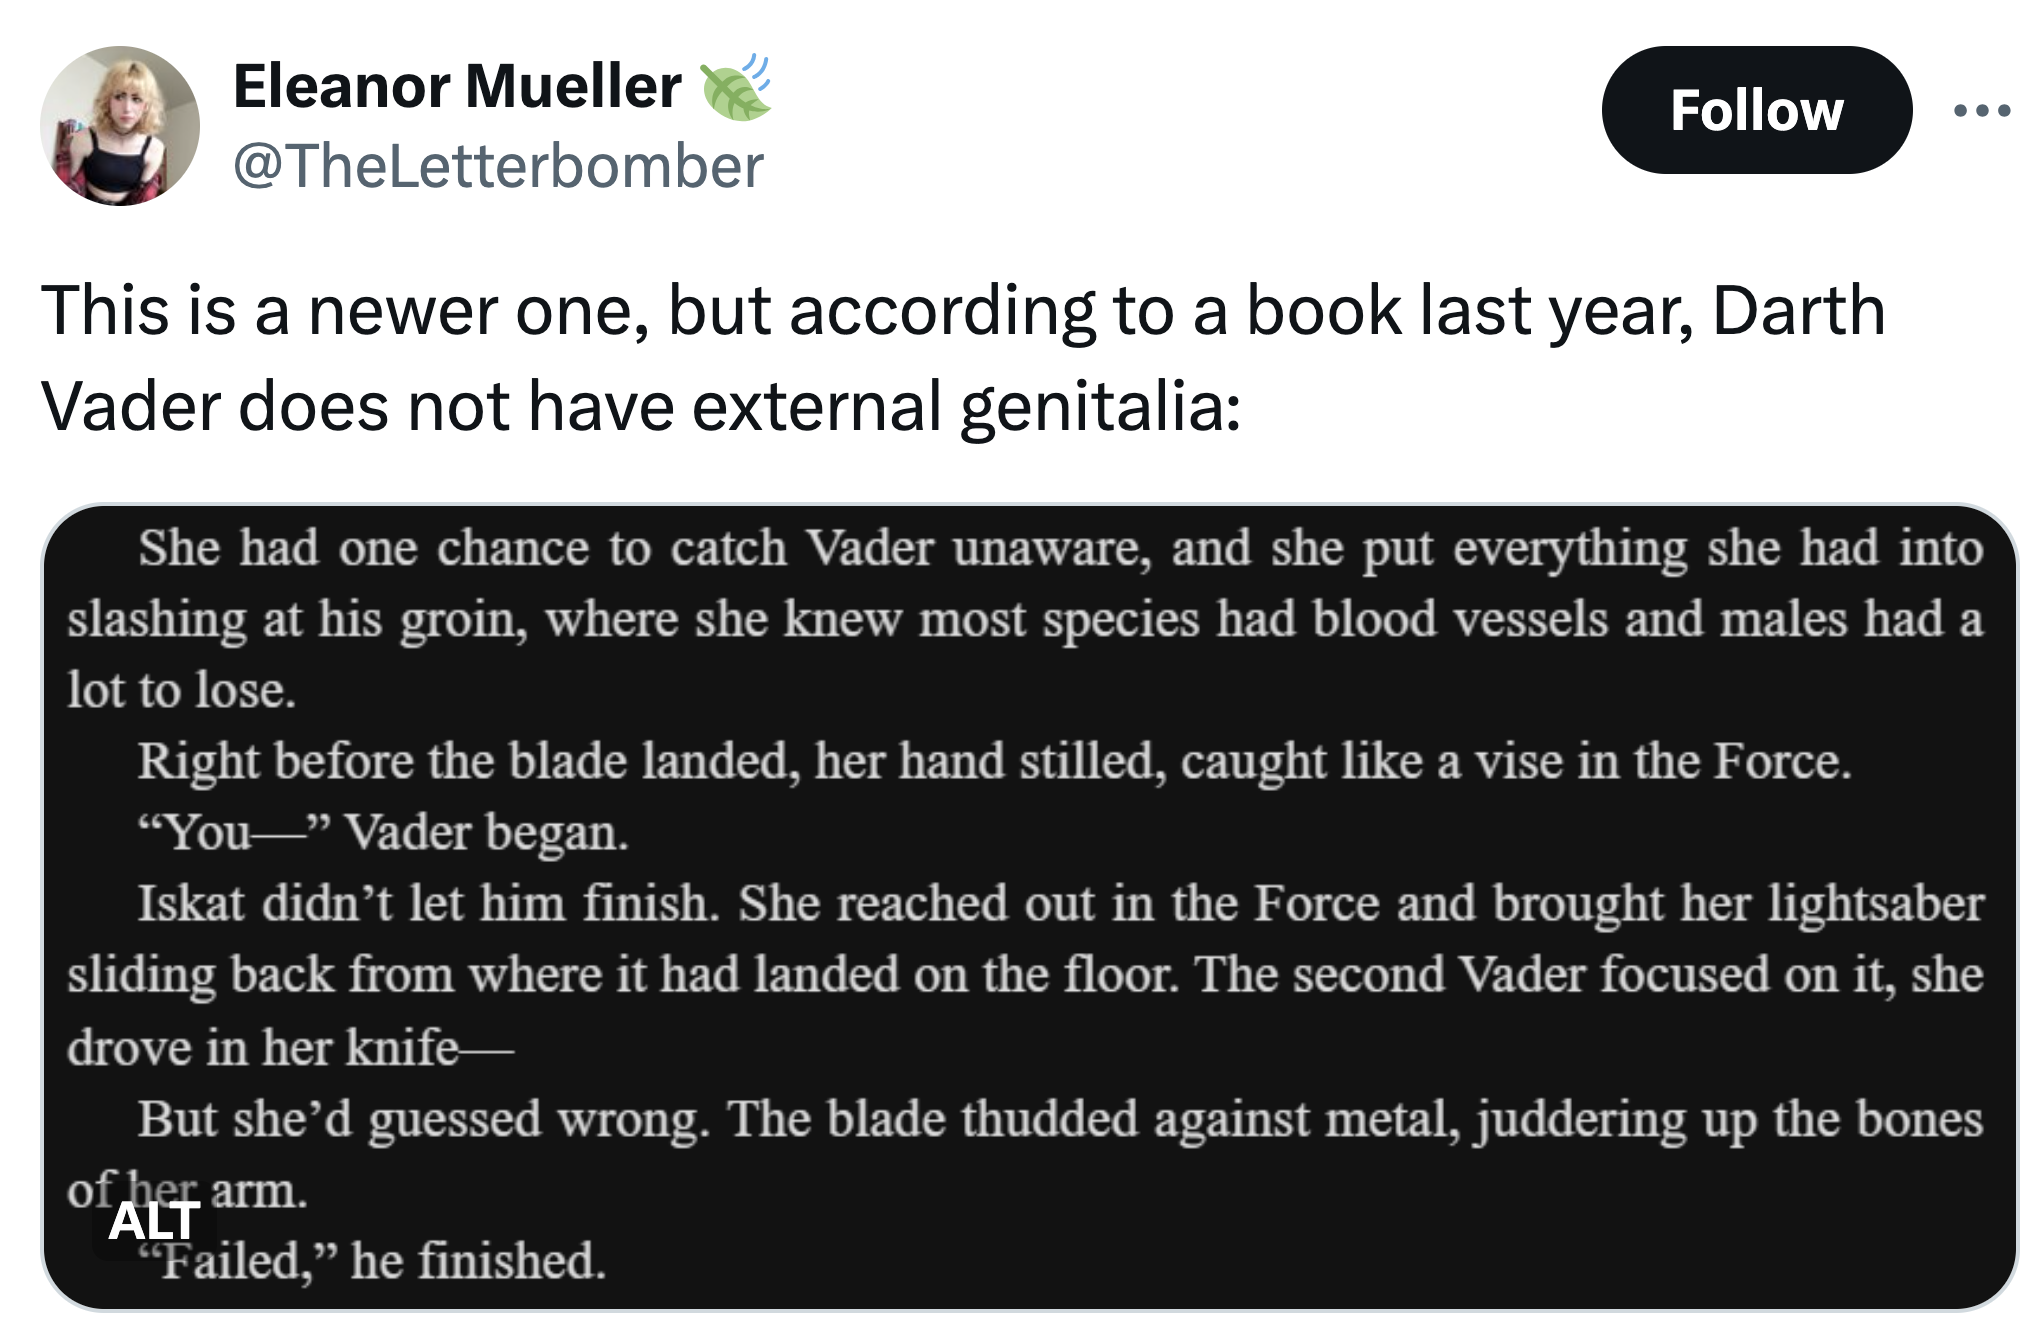 screenshot - Eleanor Mueller This is a newer one, but according to a book last year, Darth Vader does not have external genitalia She had one chance to catch Vader unaware, and she put everything she had into slashing at his groin, where she knew most spe